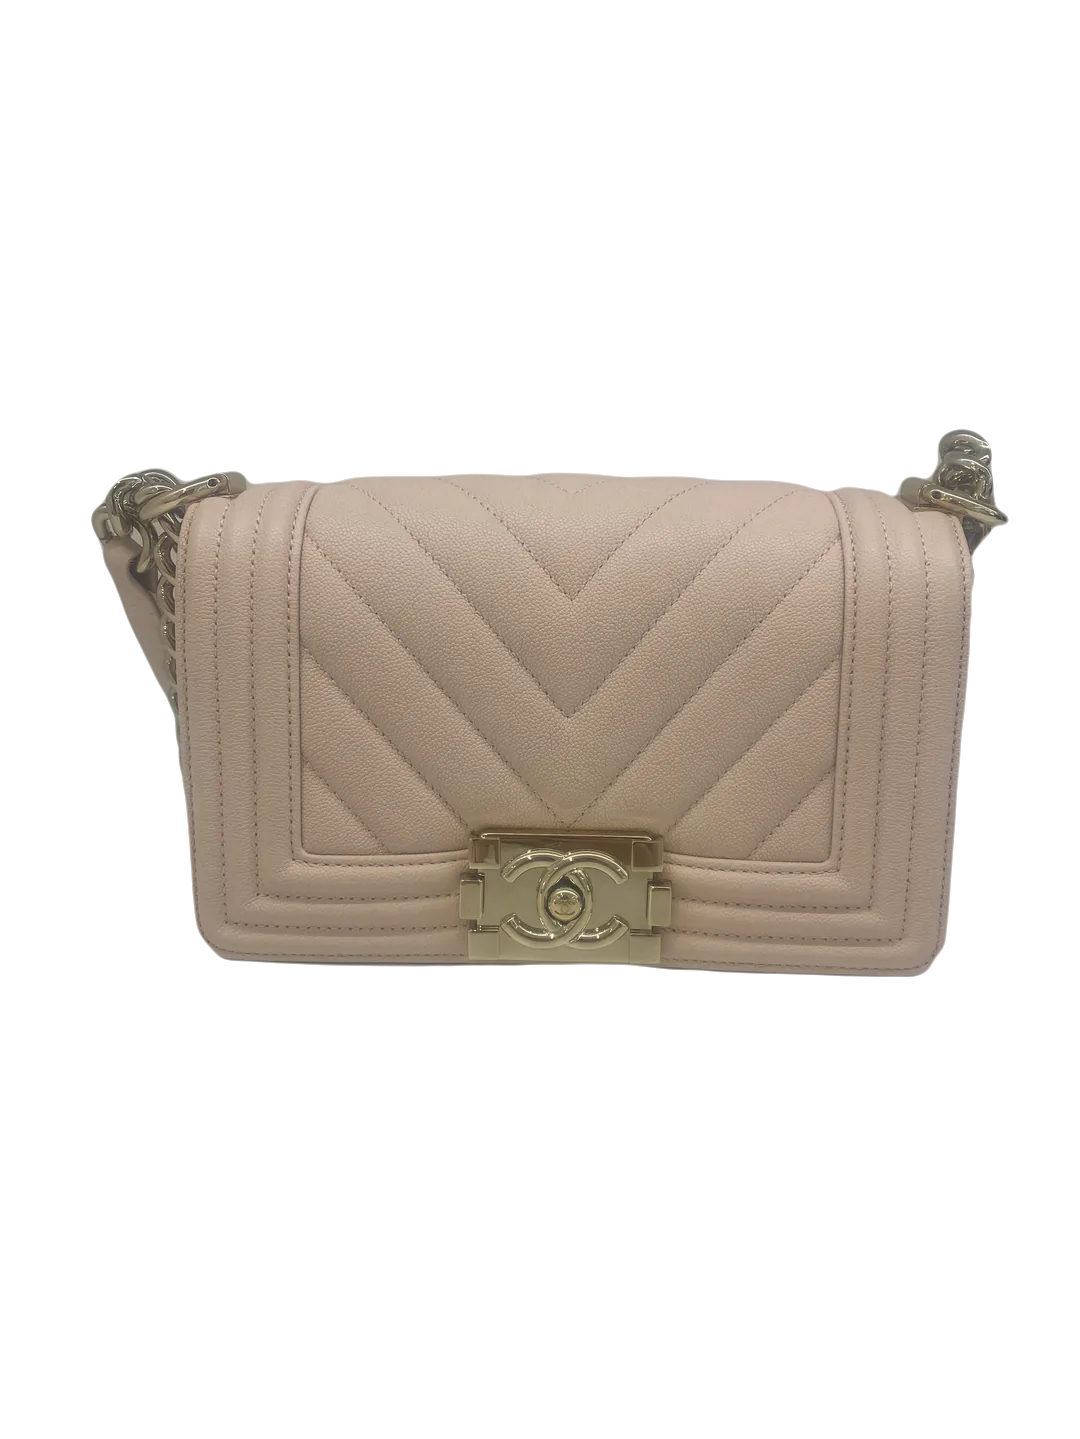 Chanel Small Boy Bag Light Pink - SOLD